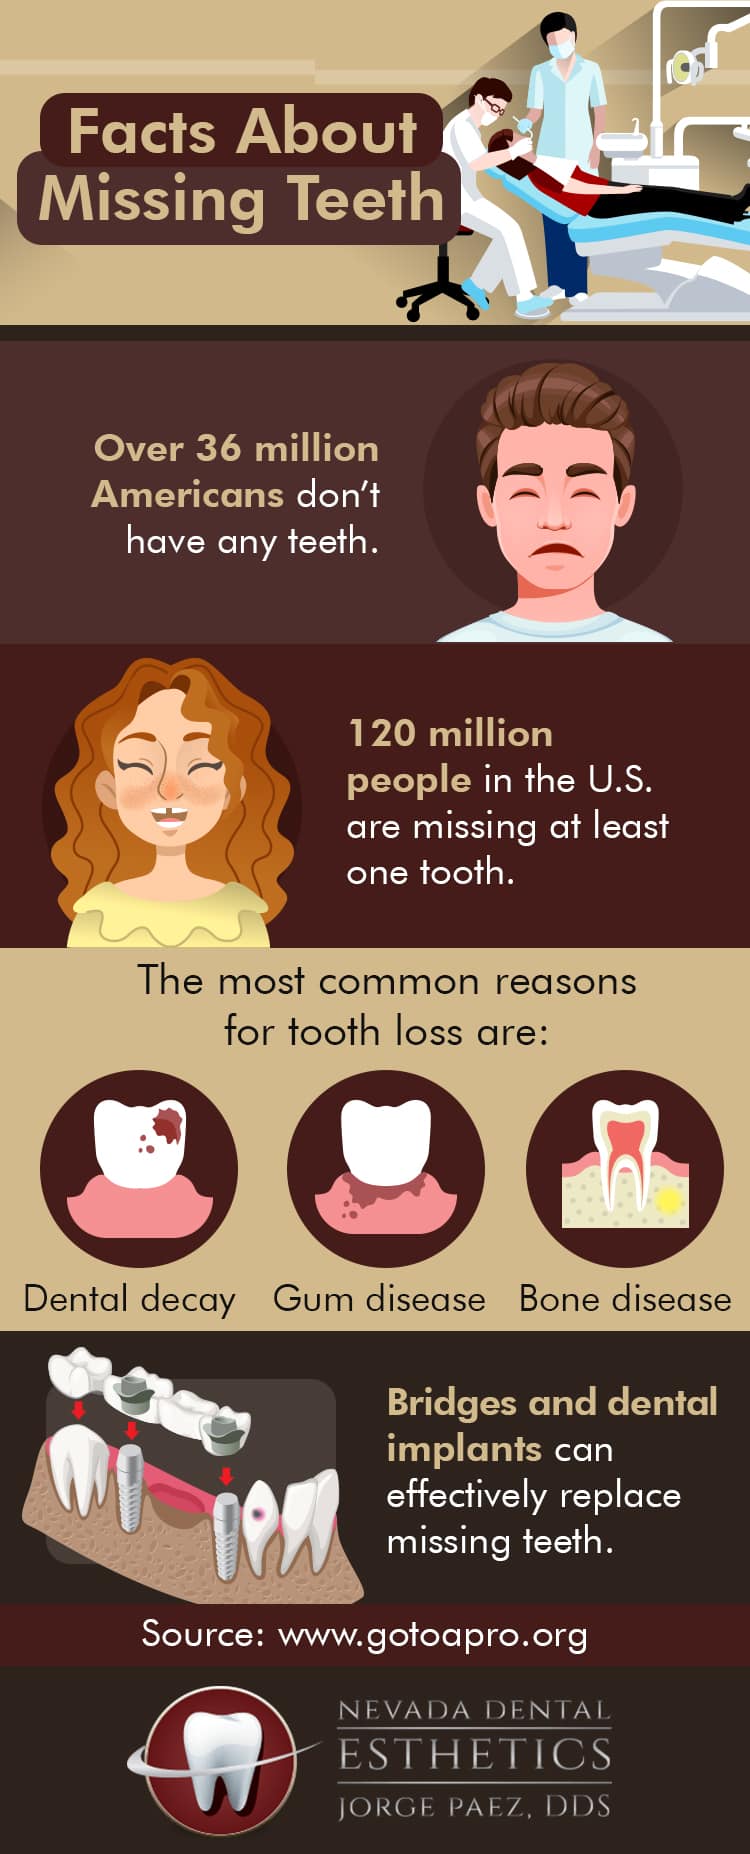 Missing teeth facts and treatments infographic